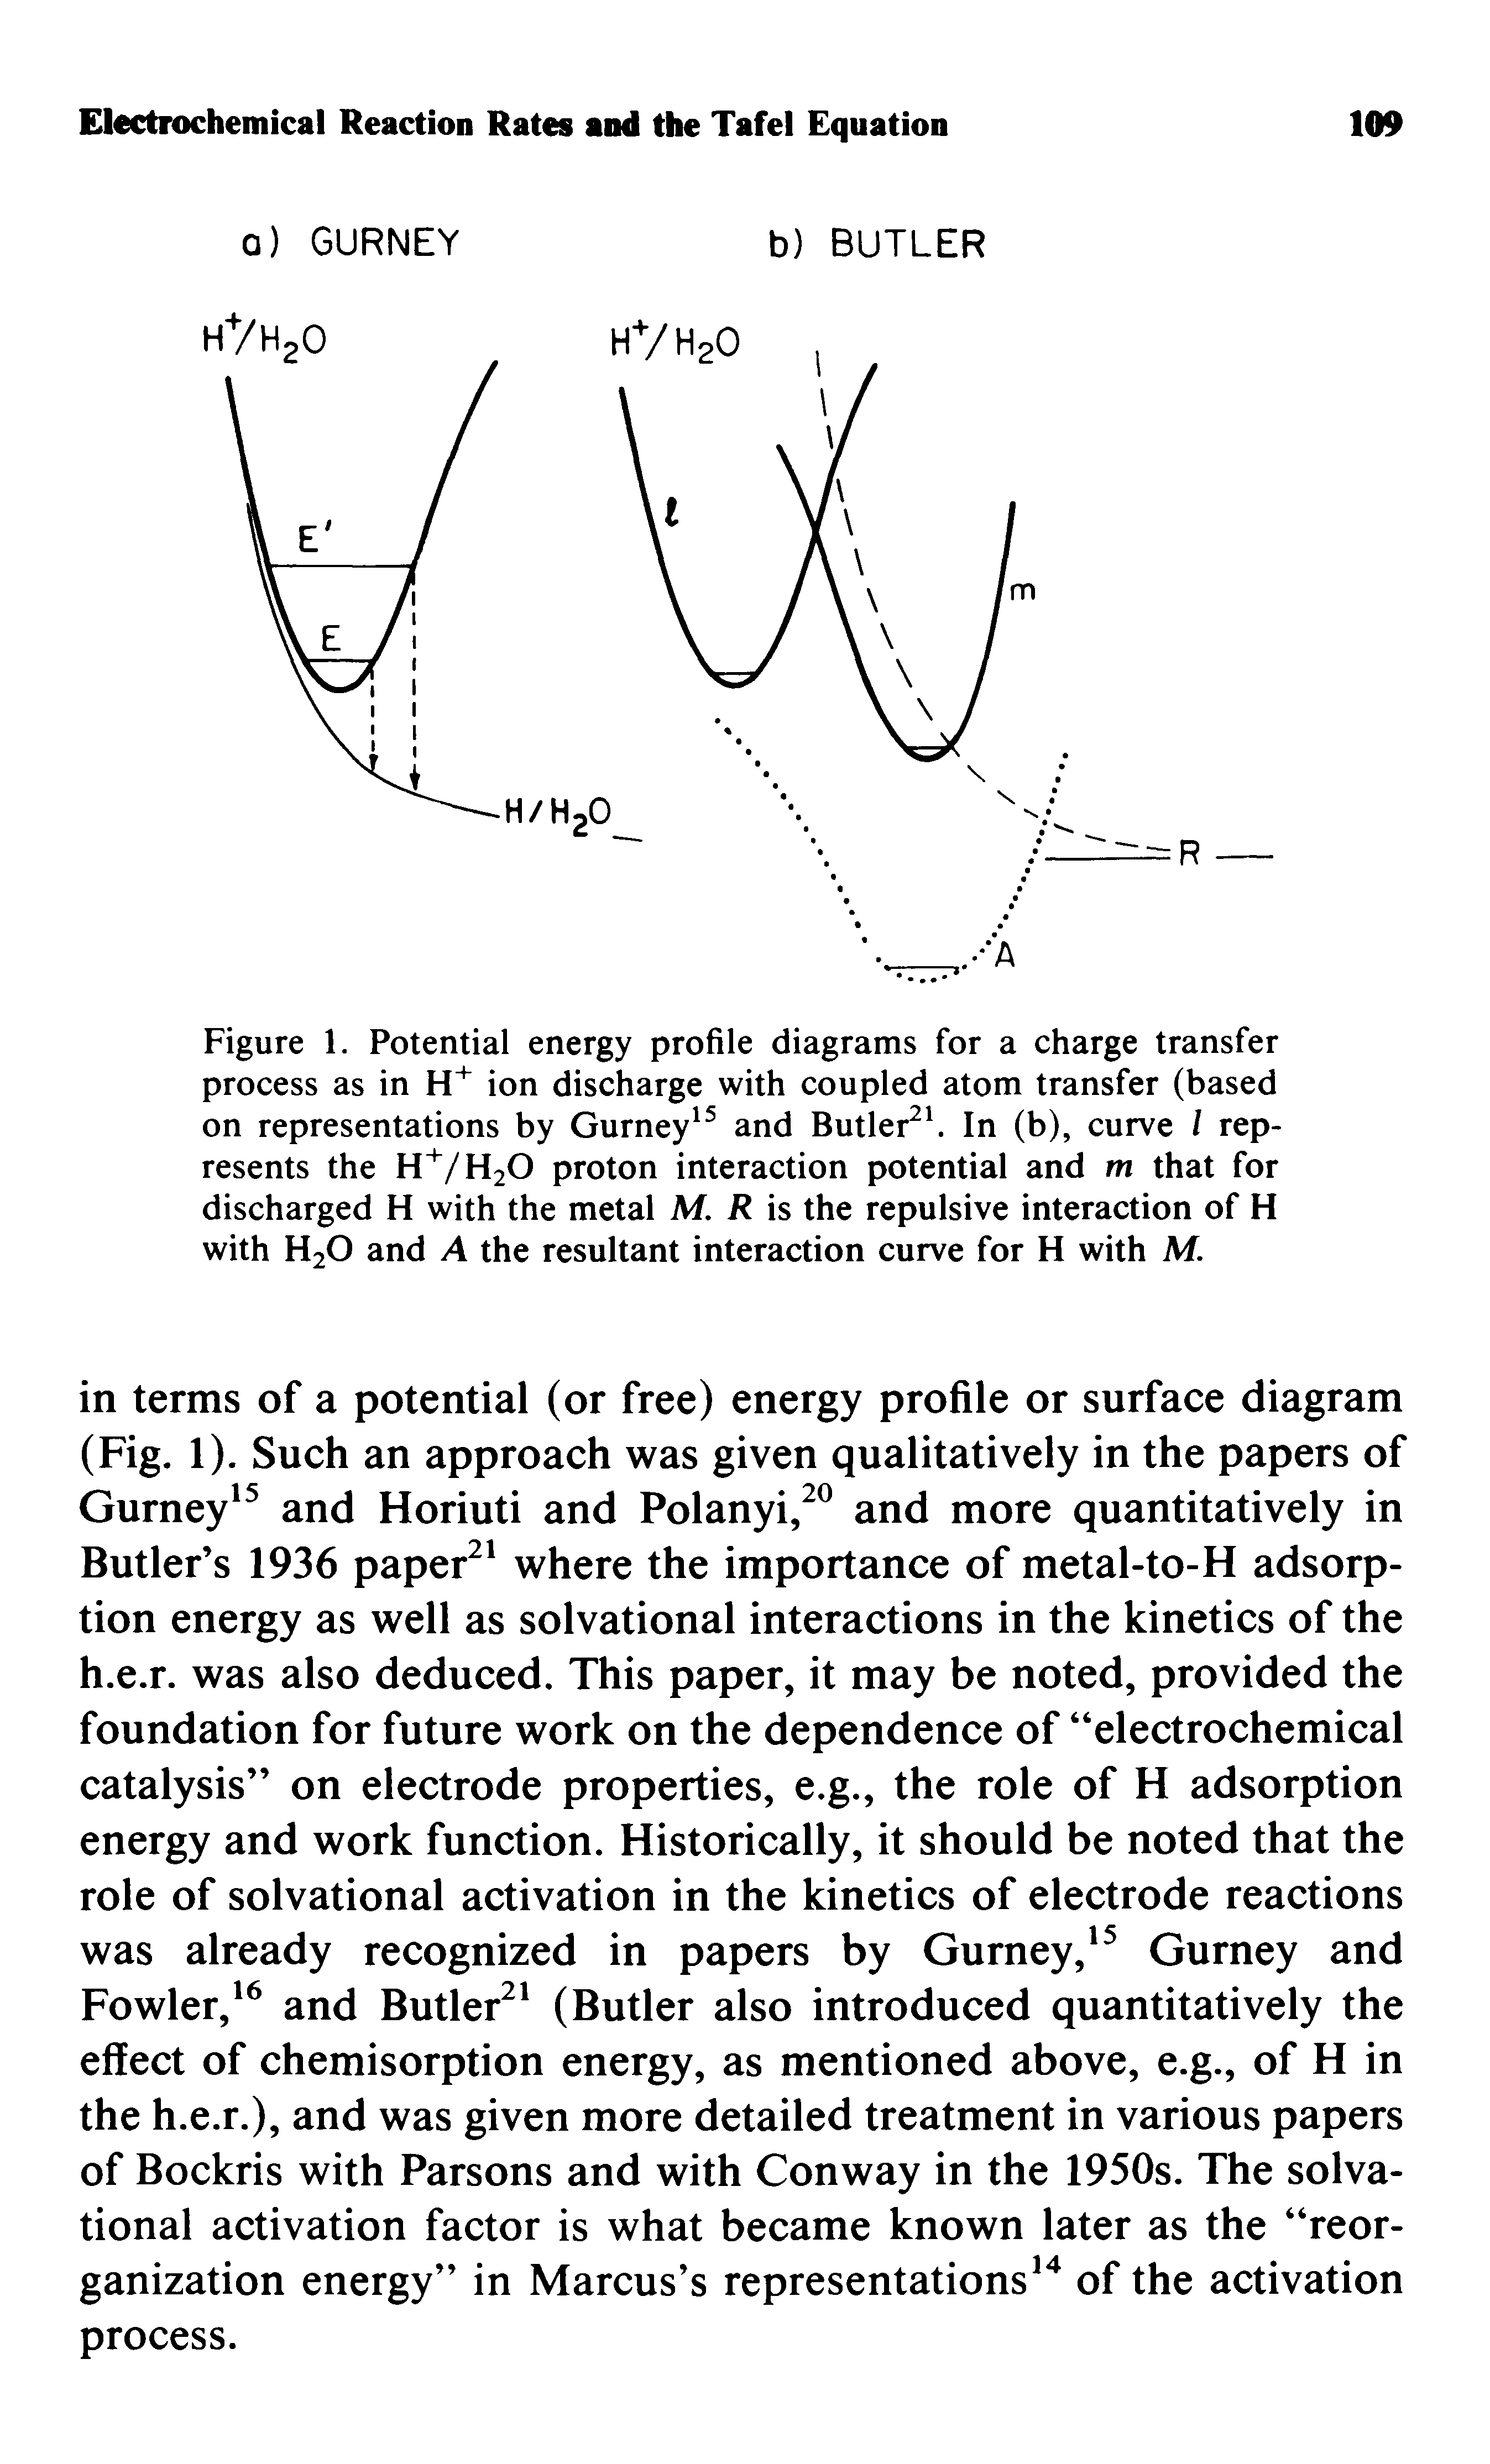 Figure 1. Potential energy profile diagrams for a charge transfer process as in ion discharge with coupled atom transfer (based on representations by Gurney and Butler L In (b), curve / represents the H /H20 proton interaction potential and m that for discharged H with the metal M. R is the repulsive interaction of H with H2O and A the resultant interaction curve for H with M.